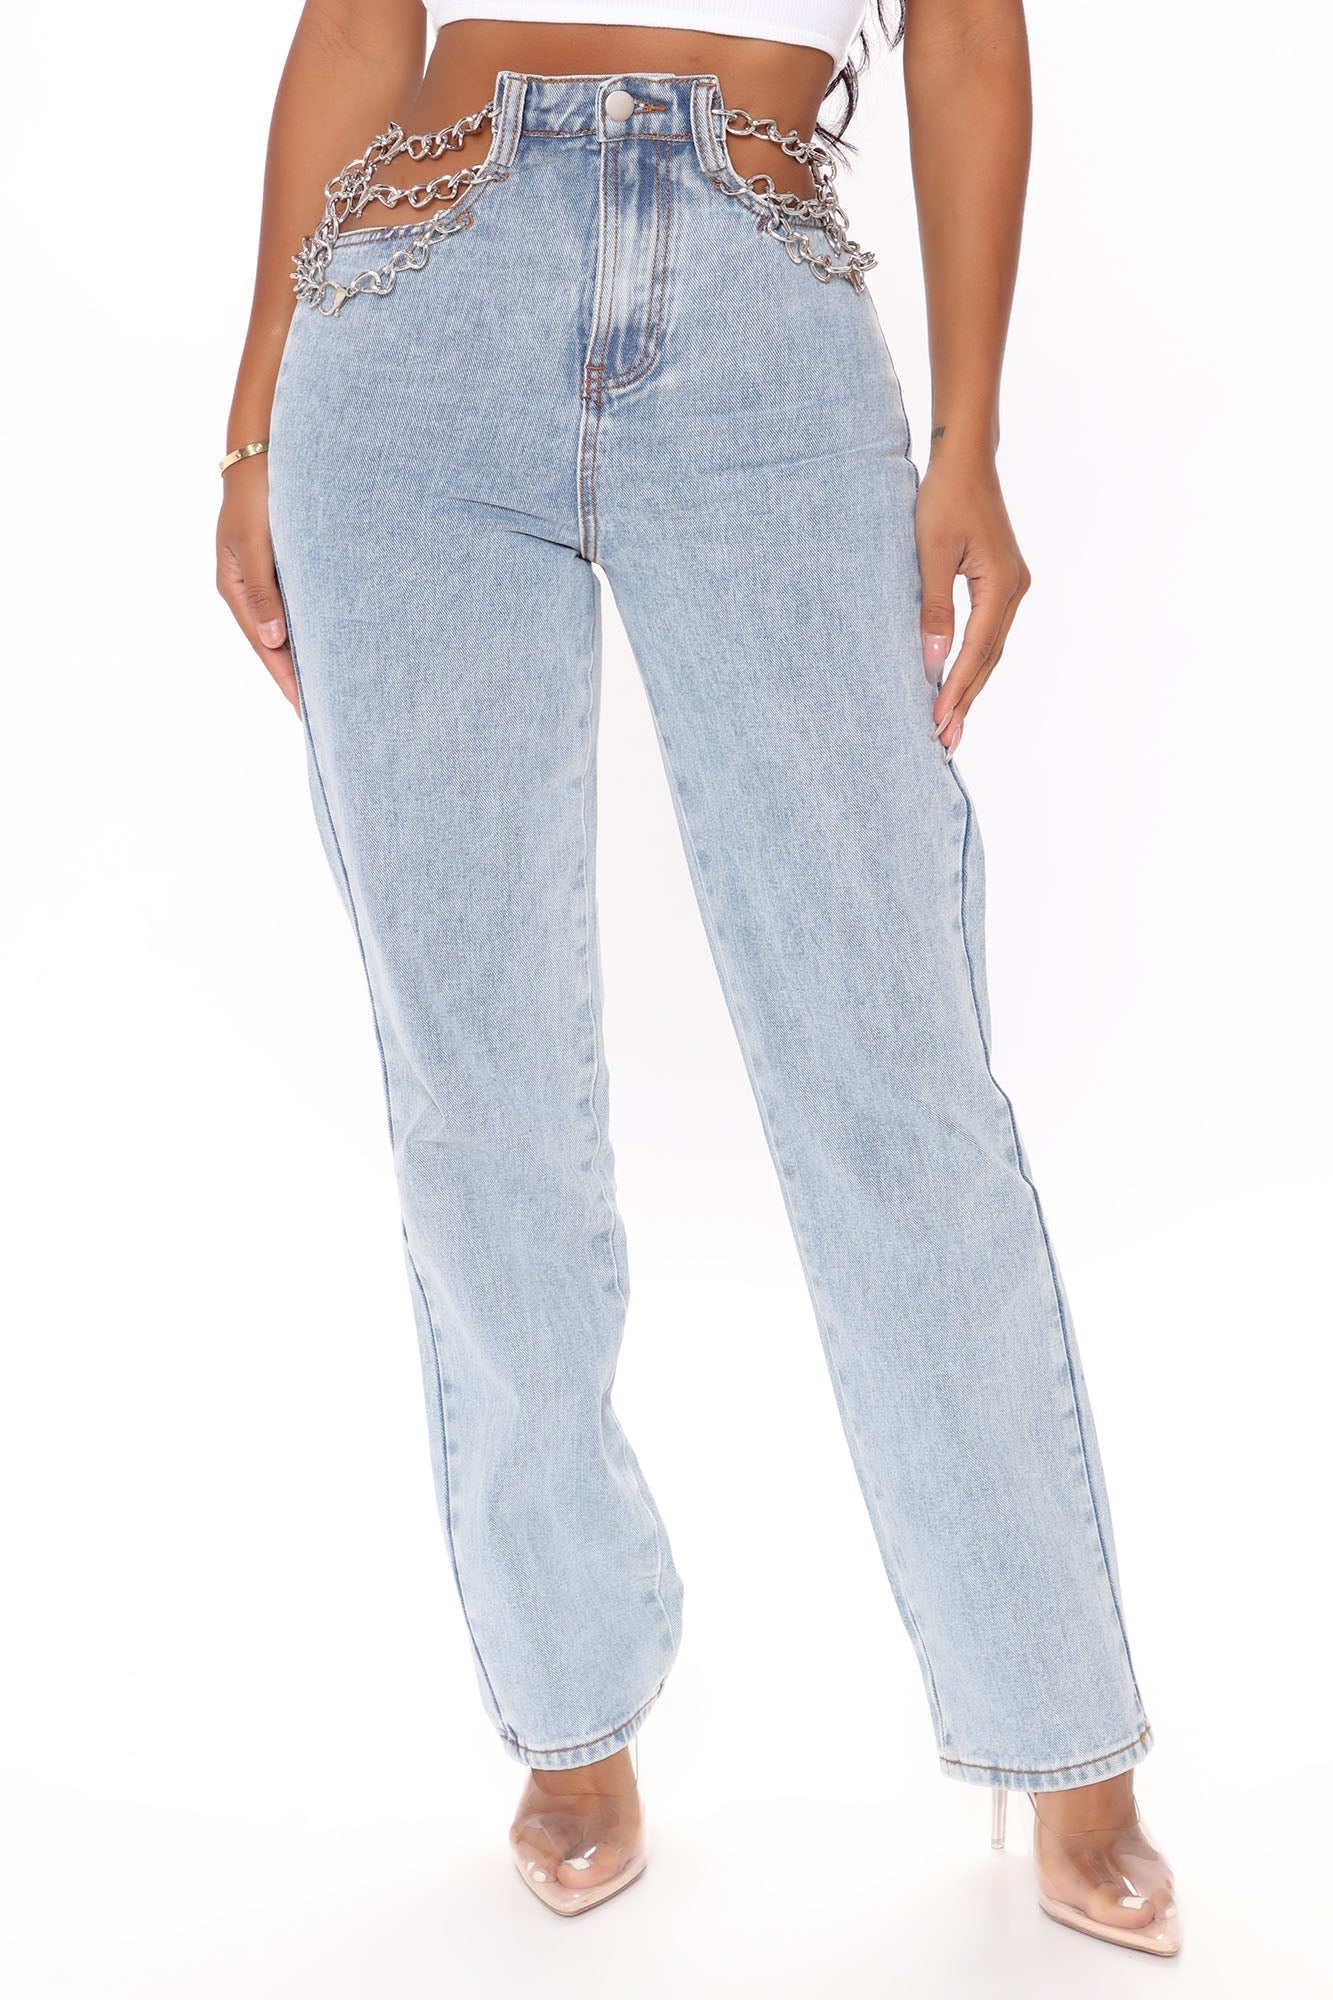 Link By Link Straight Leg Jeans - Light Blue Wash